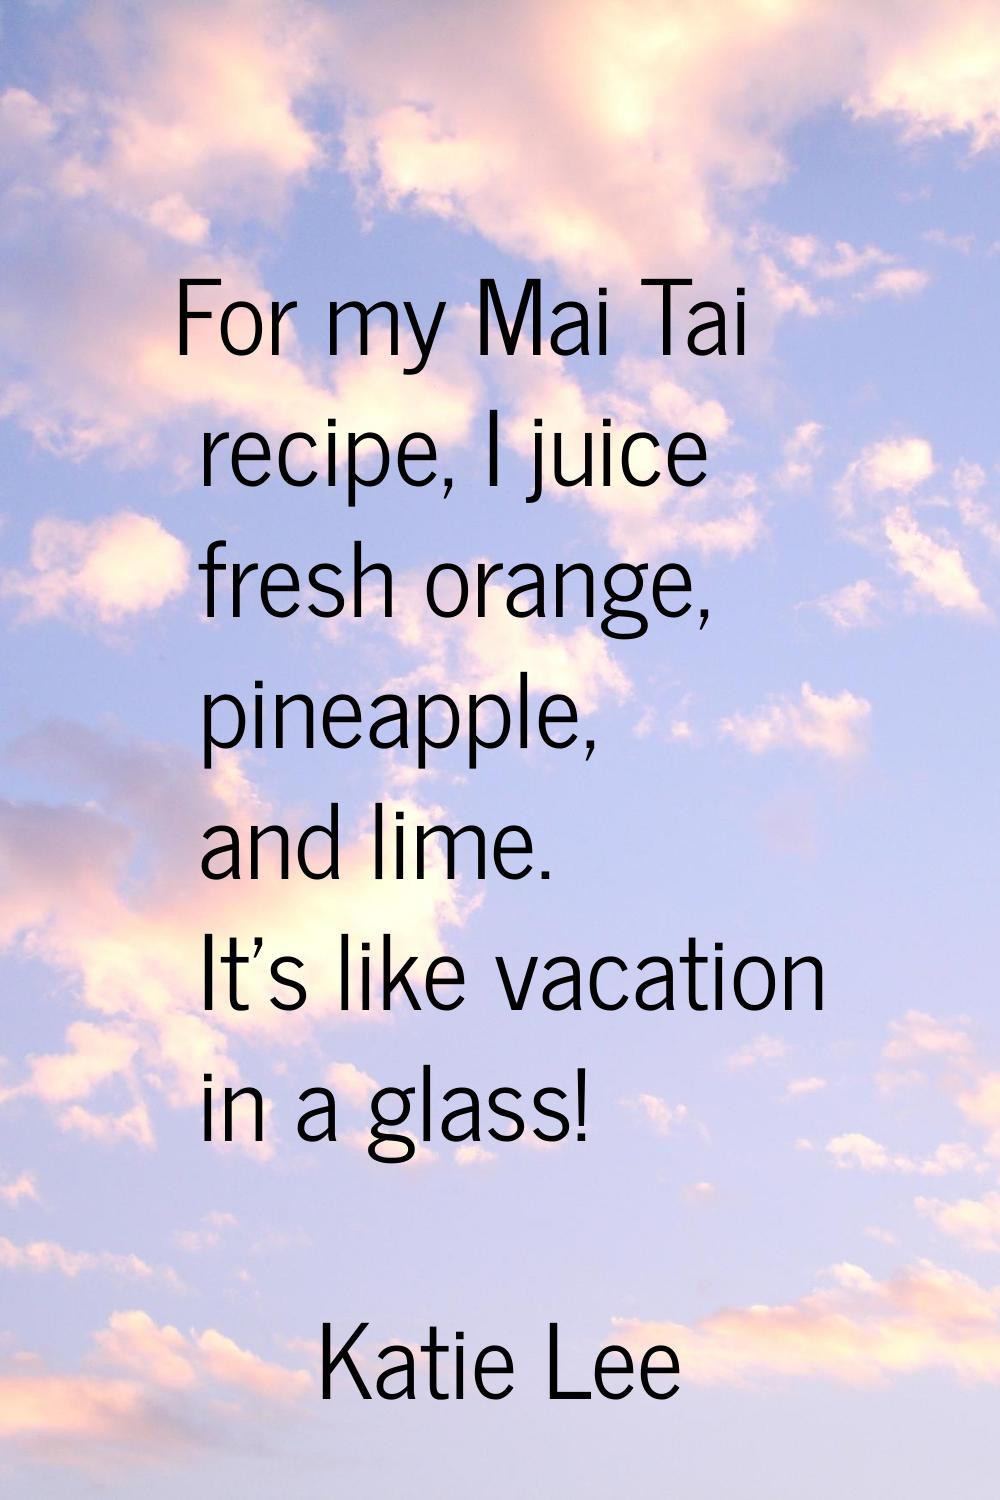 For my Mai Tai recipe, I juice fresh orange, pineapple, and lime. It's like vacation in a glass!